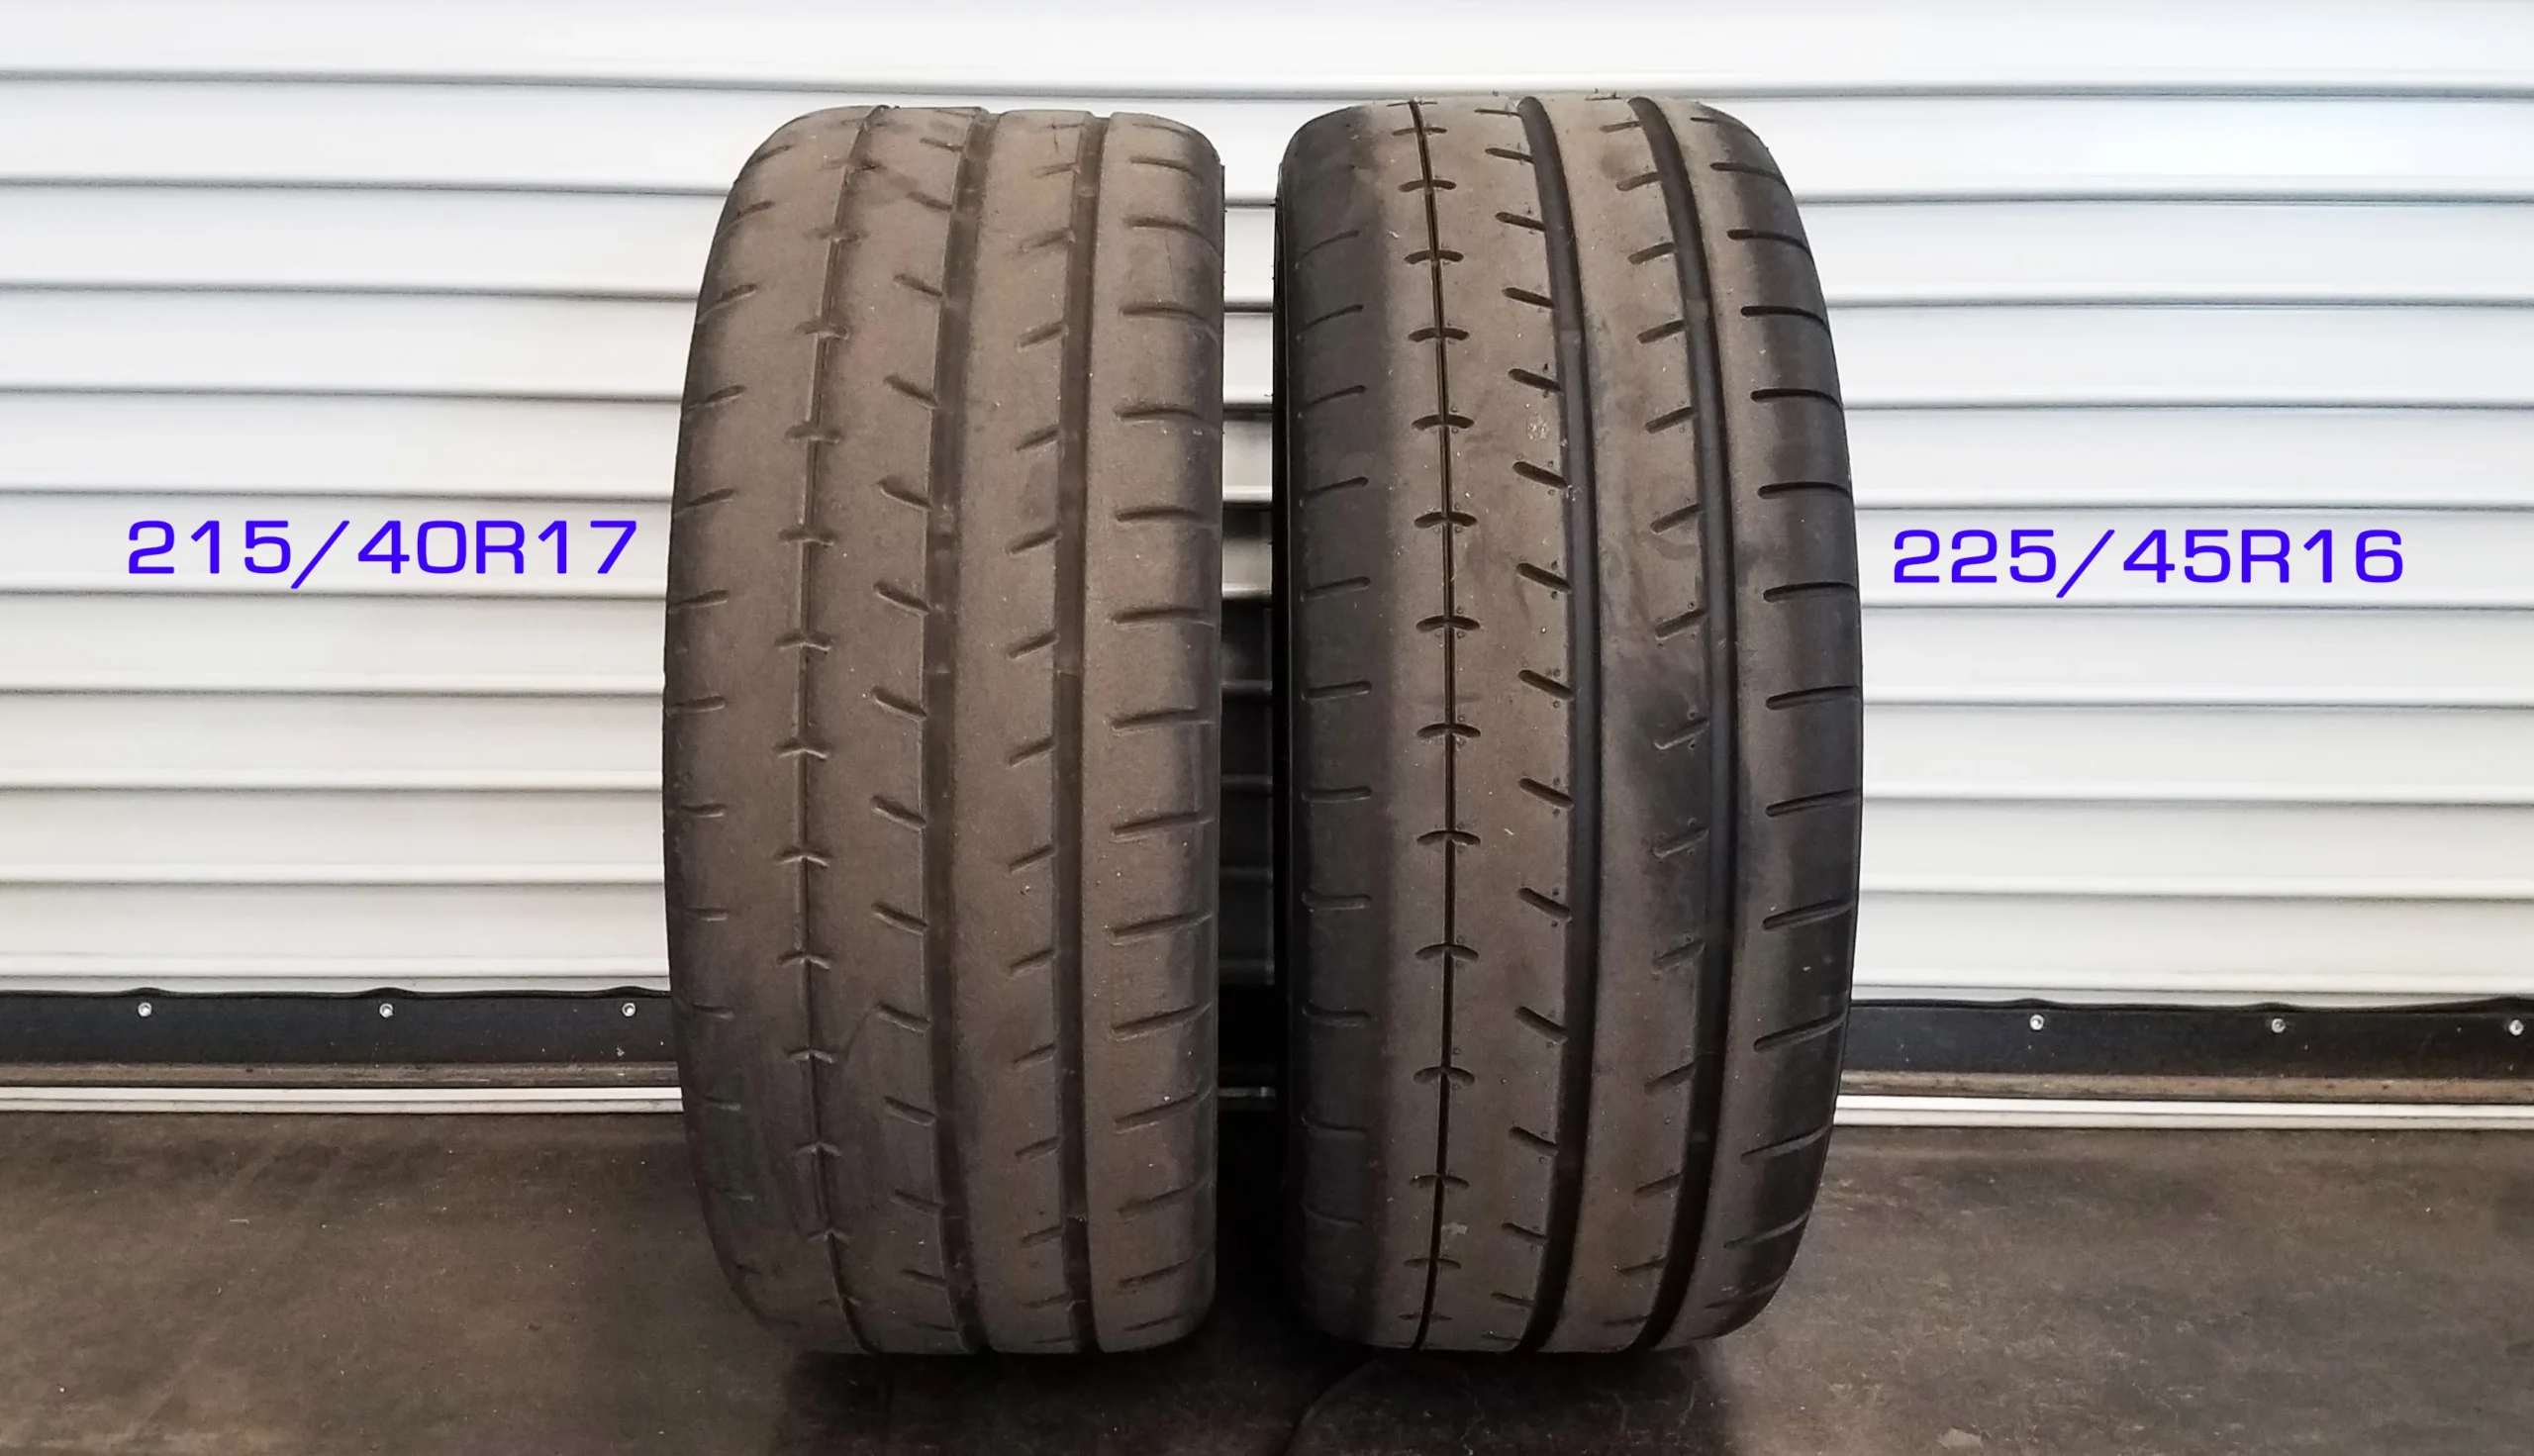 How Much Wider Is a 225 Than a 215 Tire